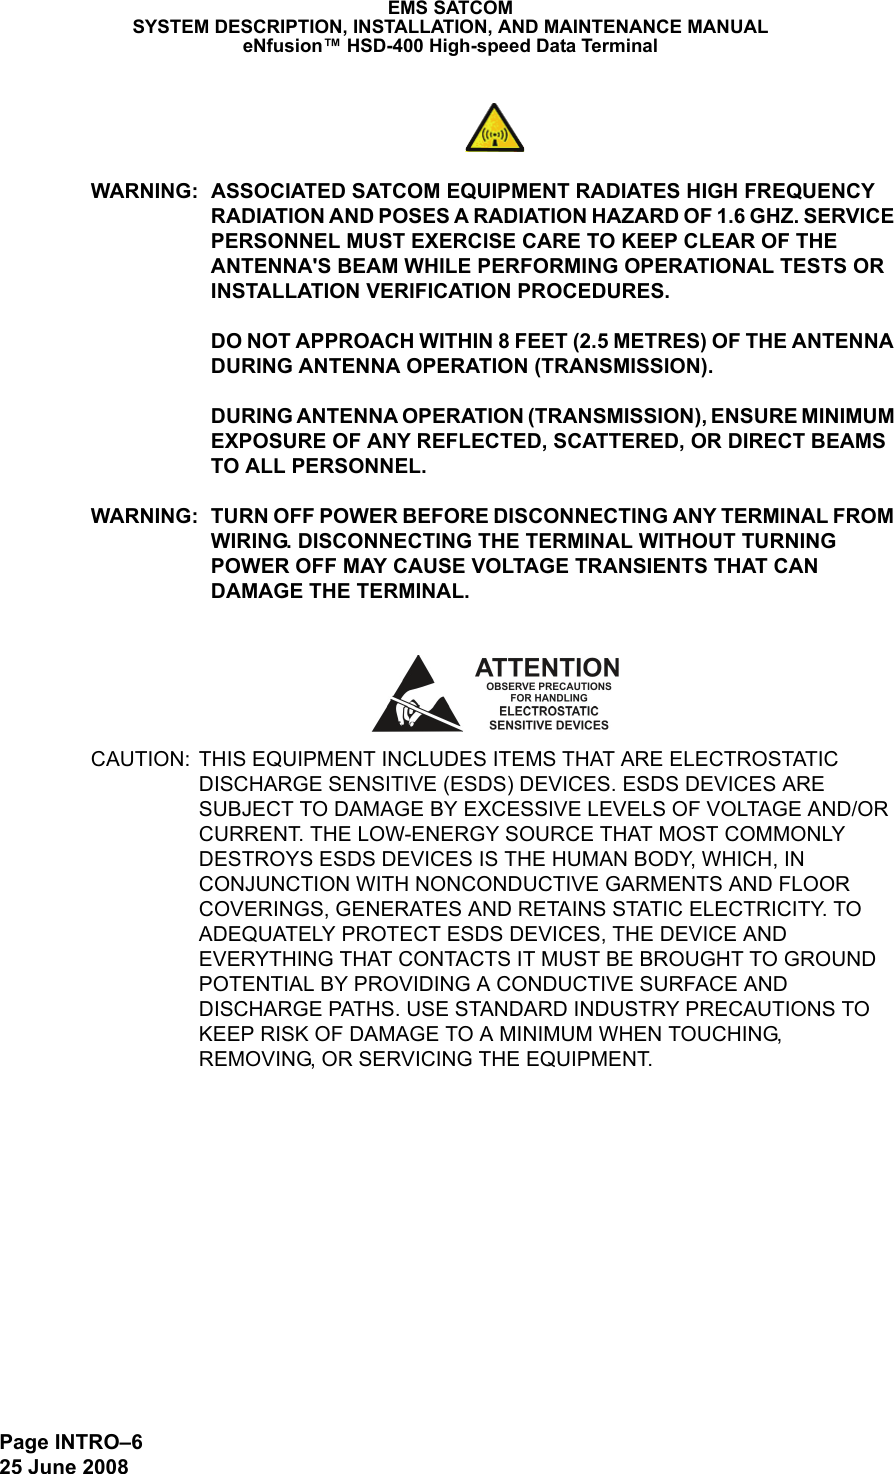 Page INTRO–625 June 2008EMS SATCOMSYSTEM DESCRIPTION, INSTALLATION, AND MAINTENANCE MANUALeNfusion™ HSD-400 High-speed Data TerminalWARNING: ASSOCIATED SATCOM EQUIPMENT RADIATES HIGH FREQUENCY RADIATION AND POSES A RADIATION HAZARD OF 1.6 GHZ. SERVICE PERSONNEL MUST EXERCISE CARE TO KEEP CLEAR OF THE ANTENNA&apos;S BEAM WHILE PERFORMING OPERATIONAL TESTS OR INSTALLATION VERIFICATION PROCEDURES. DO NOT APPROACH WITHIN 8 FEET (2.5 METRES) OF THE ANTENNA DURING ANTENNA OPERATION (TRANSMISSION). DURING ANTENNA OPERATION (TRANSMISSION), ENSURE MINIMUM EXPOSURE OF ANY REFLECTED, SCATTERED, OR DIRECT BEAMS TO ALL PERSONNEL.WARNING: TURN OFF POWER BEFORE DISCONNECTING ANY TERMINAL FROM WIRING. DISCONNECTING THE TERMINAL WITHOUT TURNING POWER OFF MAY CAUSE VOLTAGE TRANSIENTS THAT CAN DAMAGE THE TERMINAL.CAUTION: THIS EQUIPMENT INCLUDES ITEMS THAT ARE ELECTROSTATIC DISCHARGE SENSITIVE (ESDS) DEVICES. ESDS DEVICES ARE SUBJECT TO DAMAGE BY EXCESSIVE LEVELS OF VOLTAGE AND/OR CURRENT. THE LOW-ENERGY SOURCE THAT MOST COMMONLY DESTROYS ESDS DEVICES IS THE HUMAN BODY, WHICH, IN CONJUNCTION WITH NONCONDUCTIVE GARMENTS AND FLOOR COVERINGS, GENERATES AND RETAINS STATIC ELECTRICITY. TO ADEQUATELY PROTECT ESDS DEVICES, THE DEVICE AND EVERYTHING THAT CONTACTS IT MUST BE BROUGHT TO GROUND POTENTIAL BY PROVIDING A CONDUCTIVE SURFACE AND DISCHARGE PATHS. USE STANDARD INDUSTRY PRECAUTIONS TO KEEP RISK OF DAMAGE TO A MINIMUM WHEN TOUCHING, REMOVING, OR SERVICING THE EQUIPMENT.